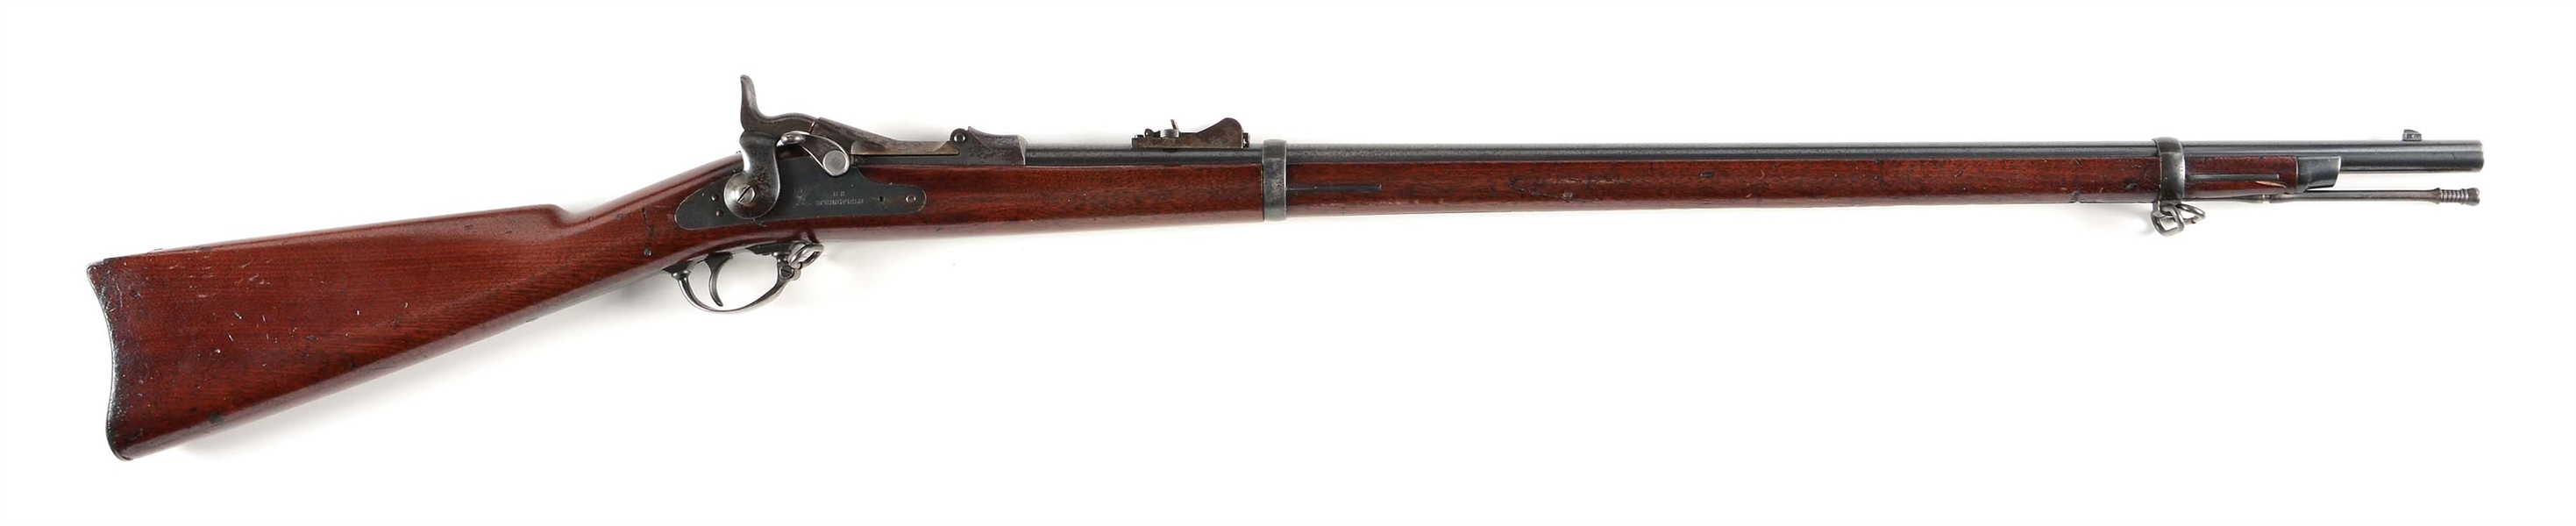 (A) US SPRINGFIELD MODEL 1877 (TRANSITIONAL 1879) TRAPDOOR RIFLE.